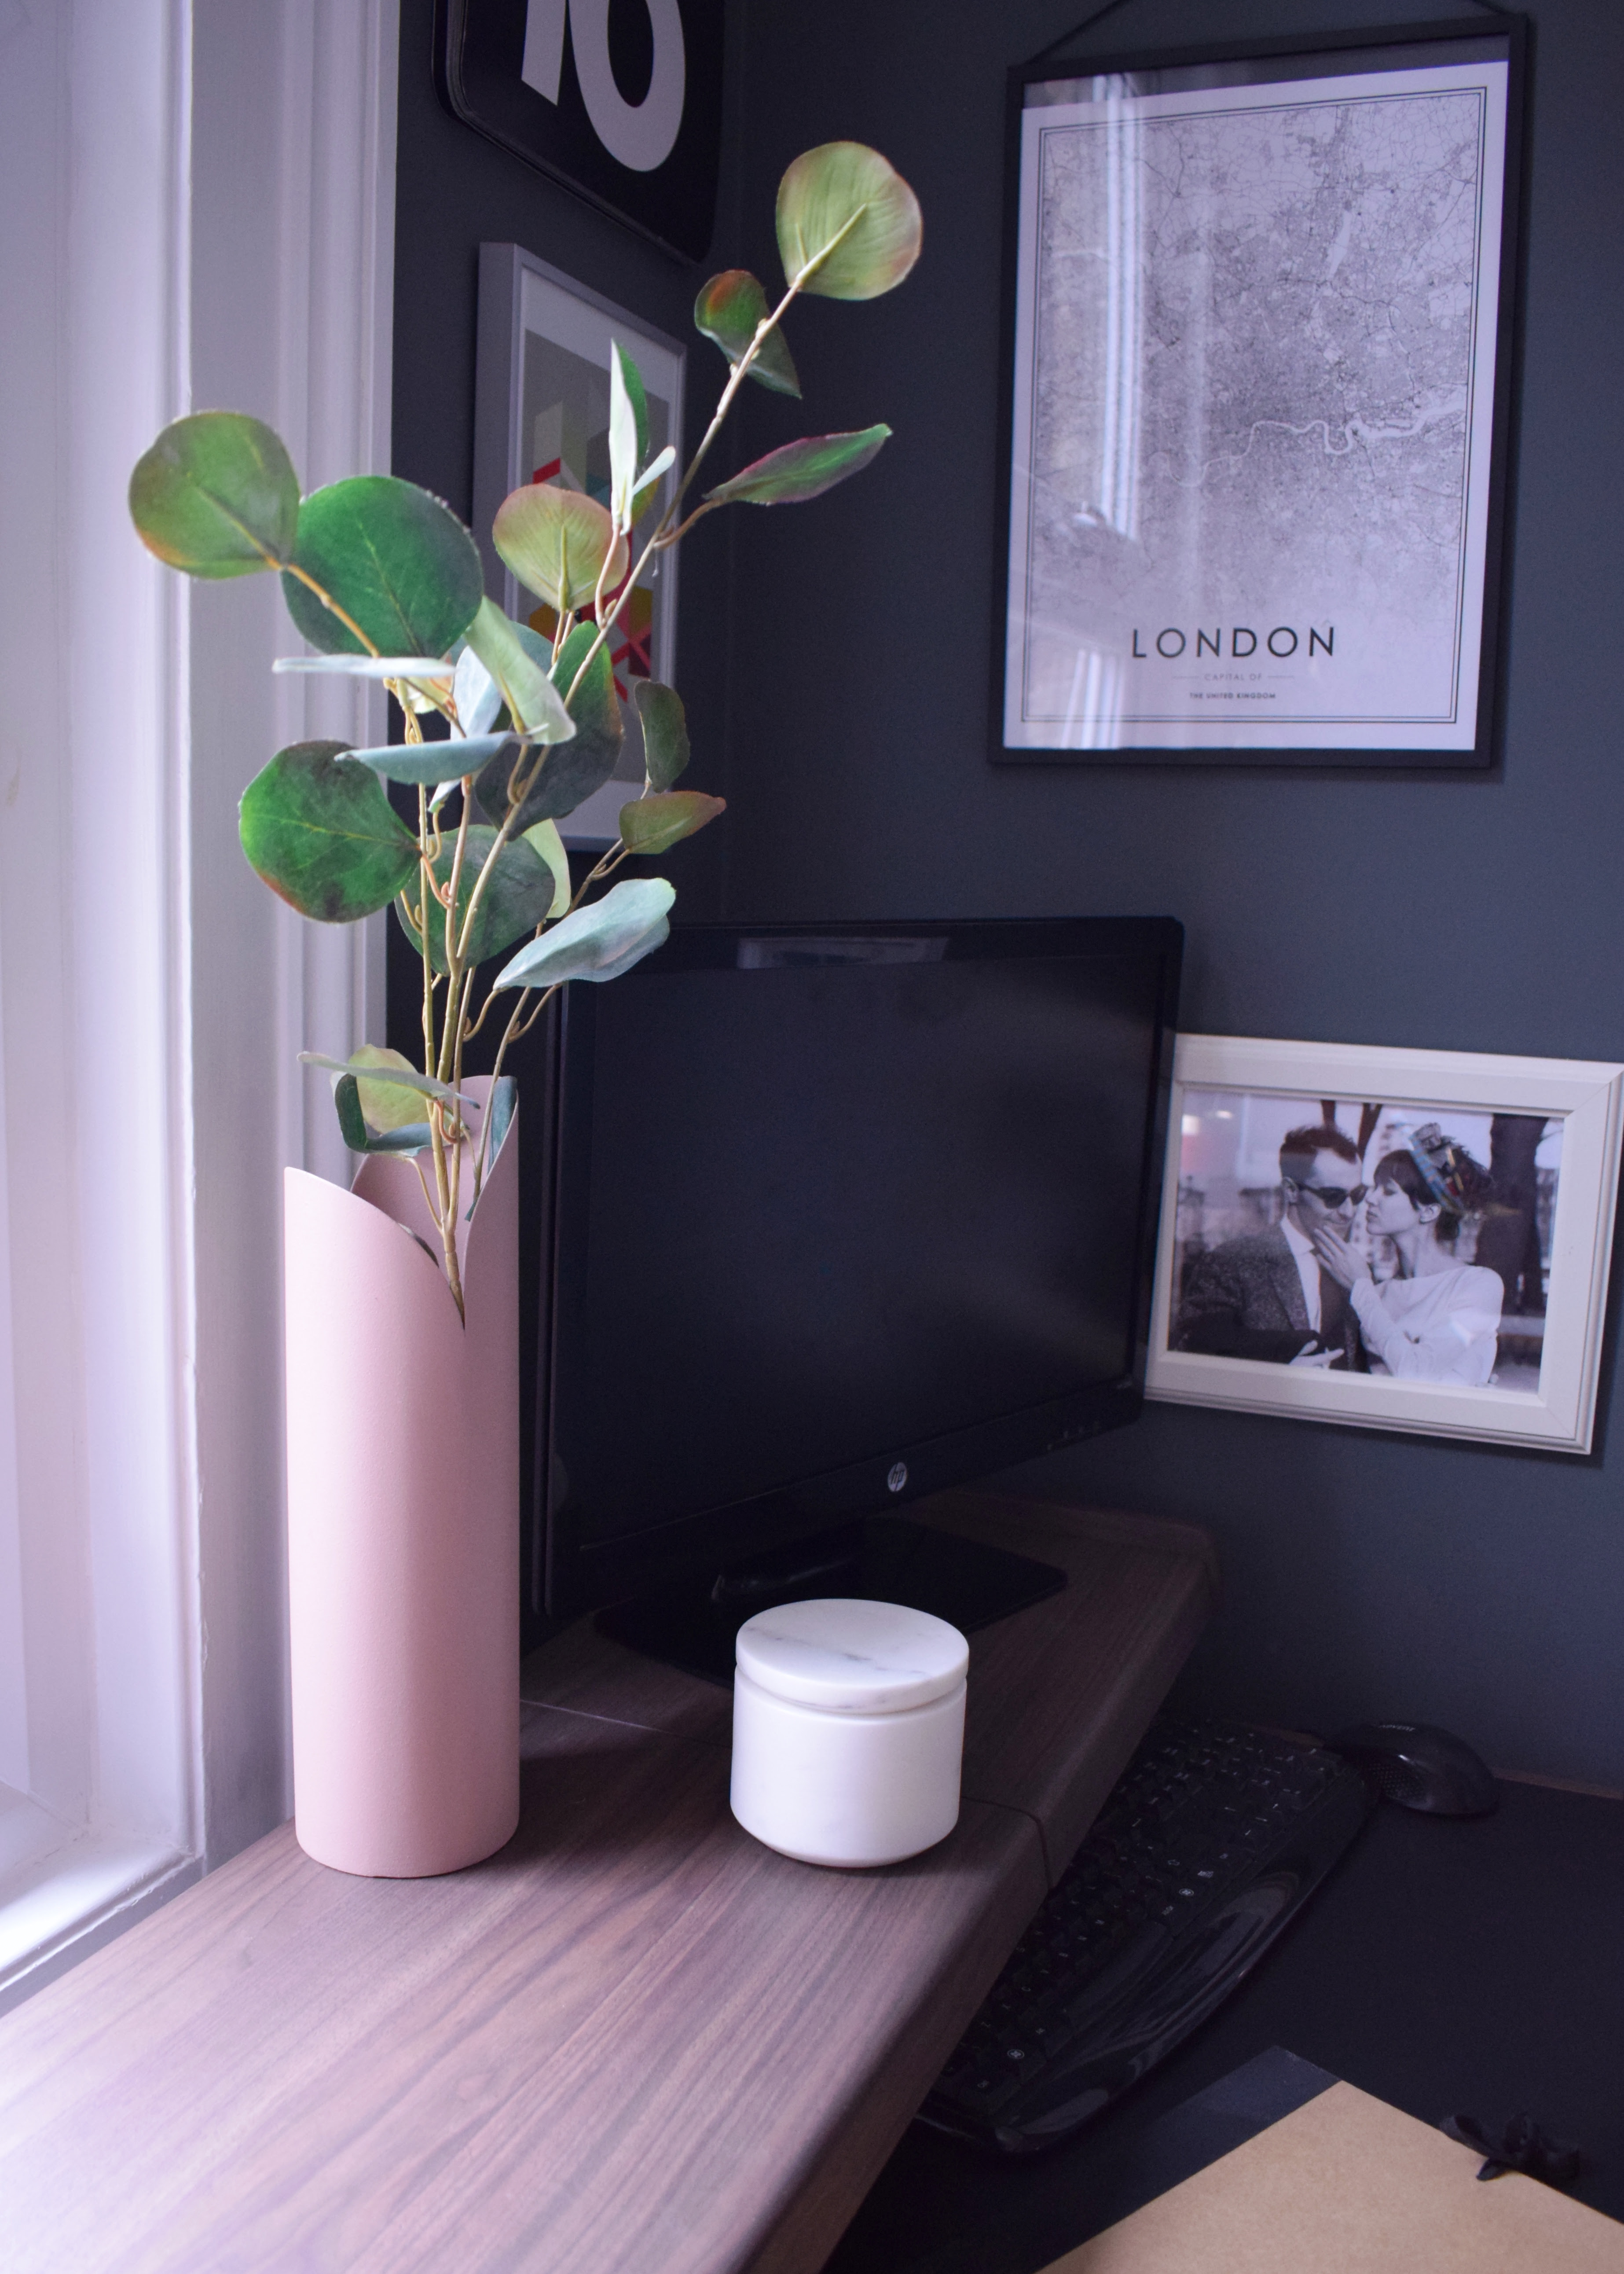 MADE Desk Story Zeke bloggers grey modernist home tour of office